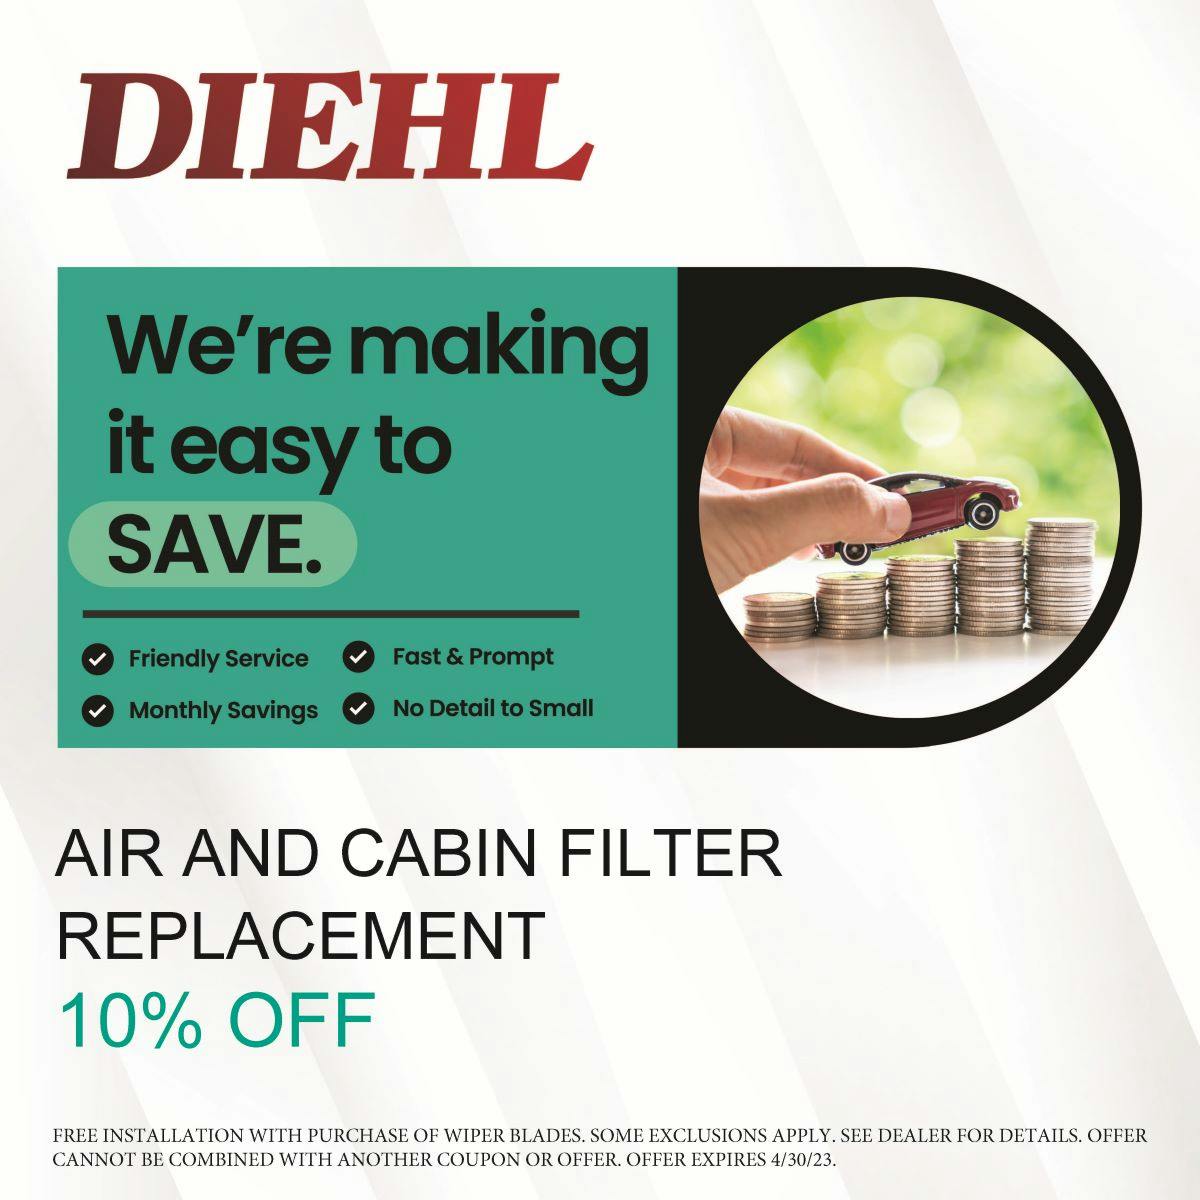 Air and Cabin Filter Replacement | Diehl Mitsubishi of Massillon